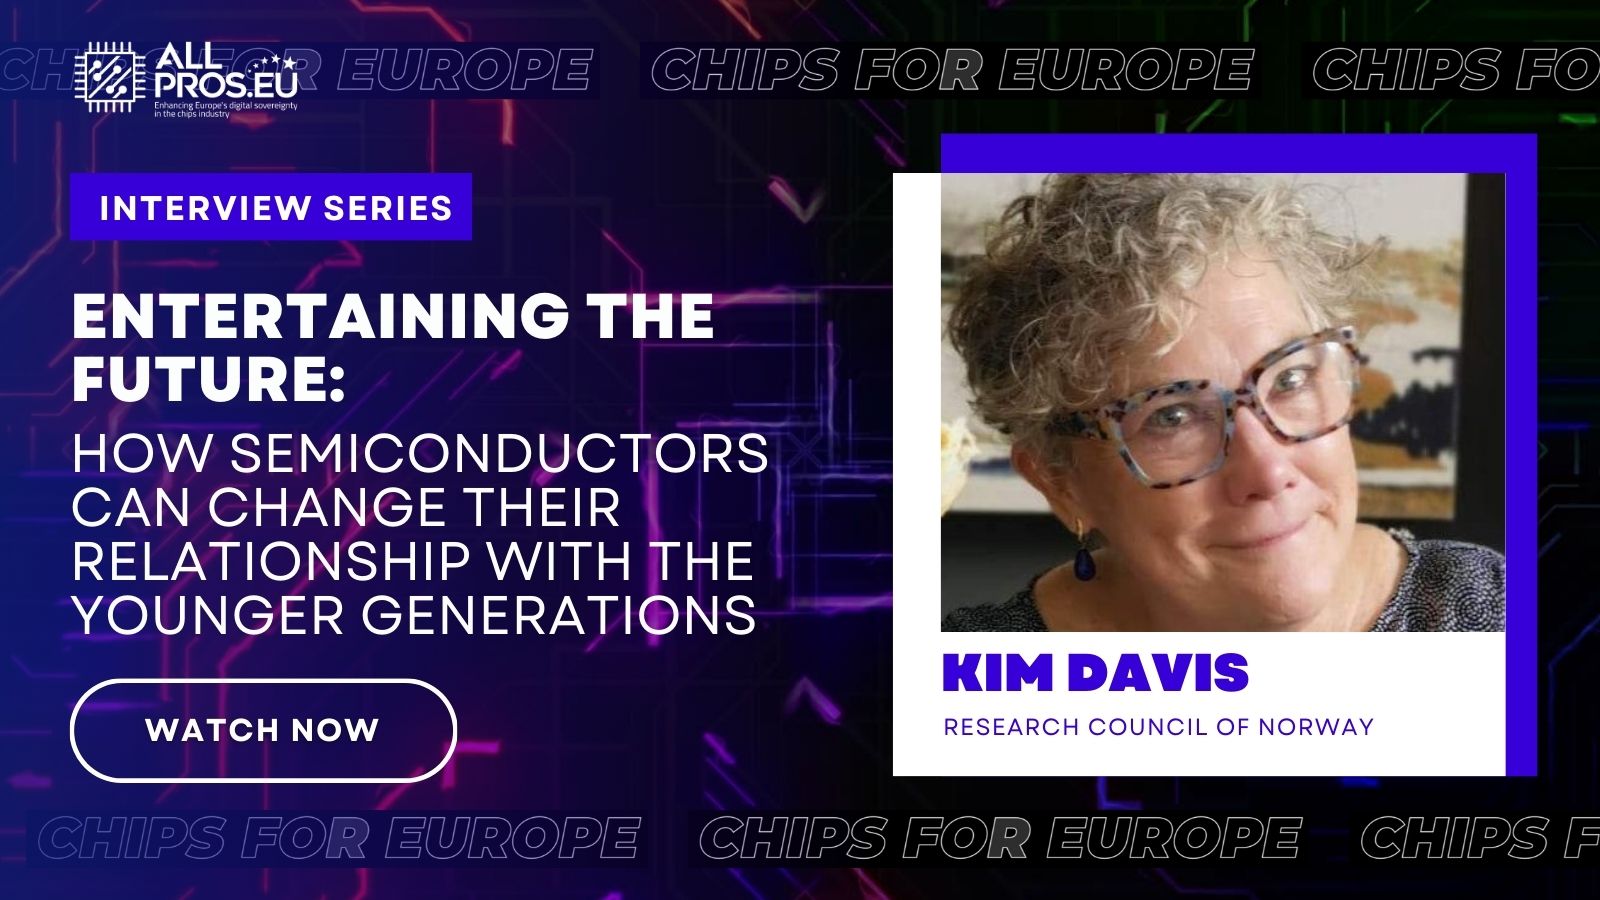 ALLPROS.eu Interview with Kim Davis, Research Council of Norway